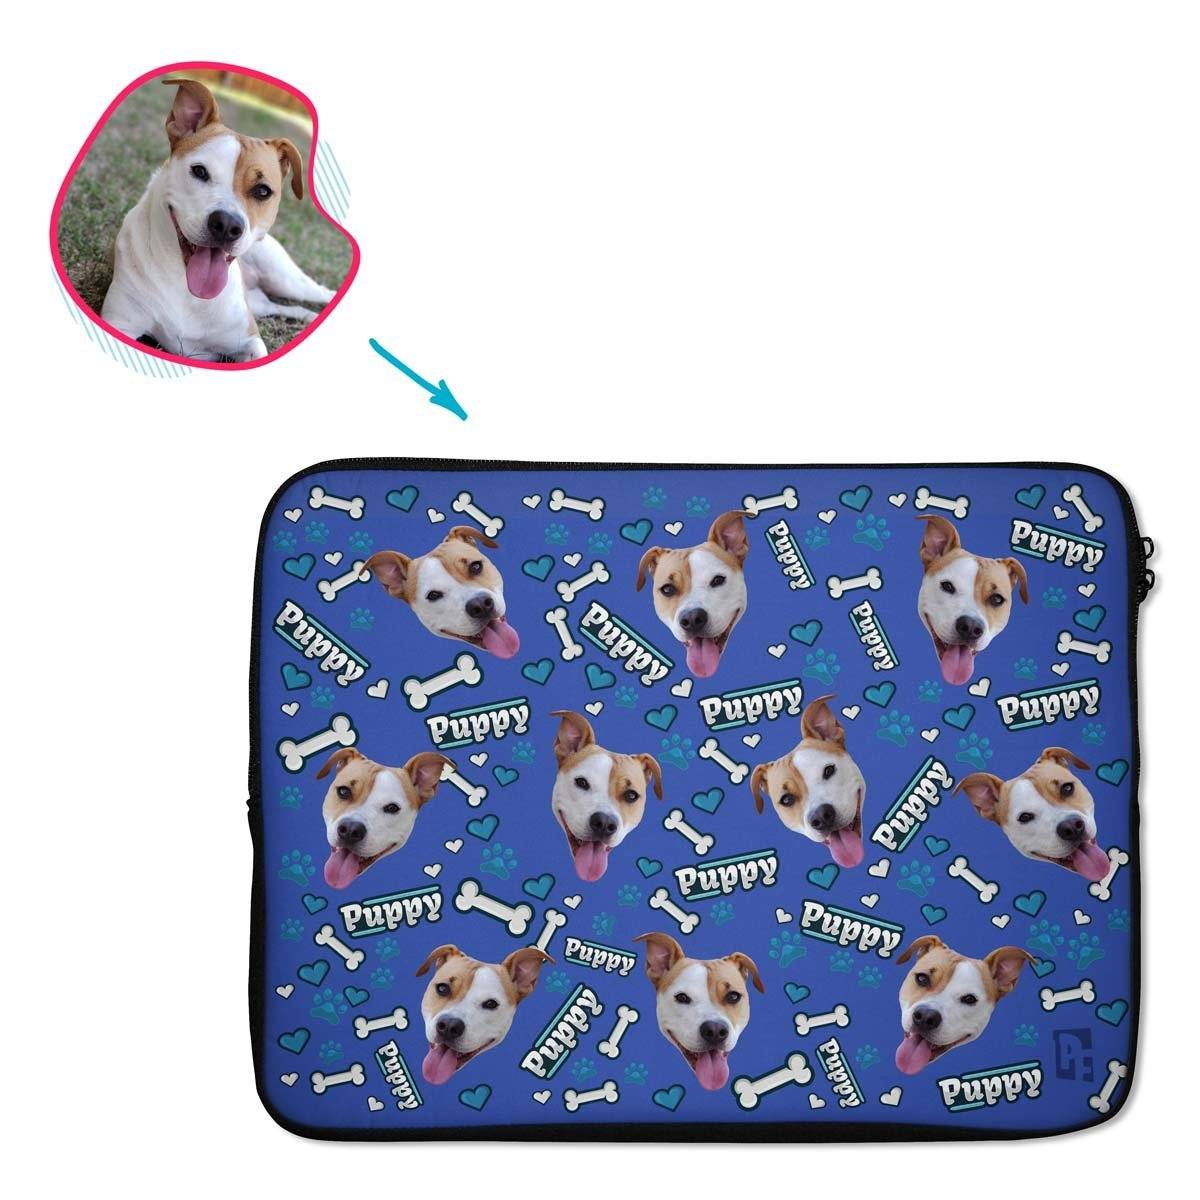 darkblue Puppy laptop sleeve personalized with photo of face printed on them